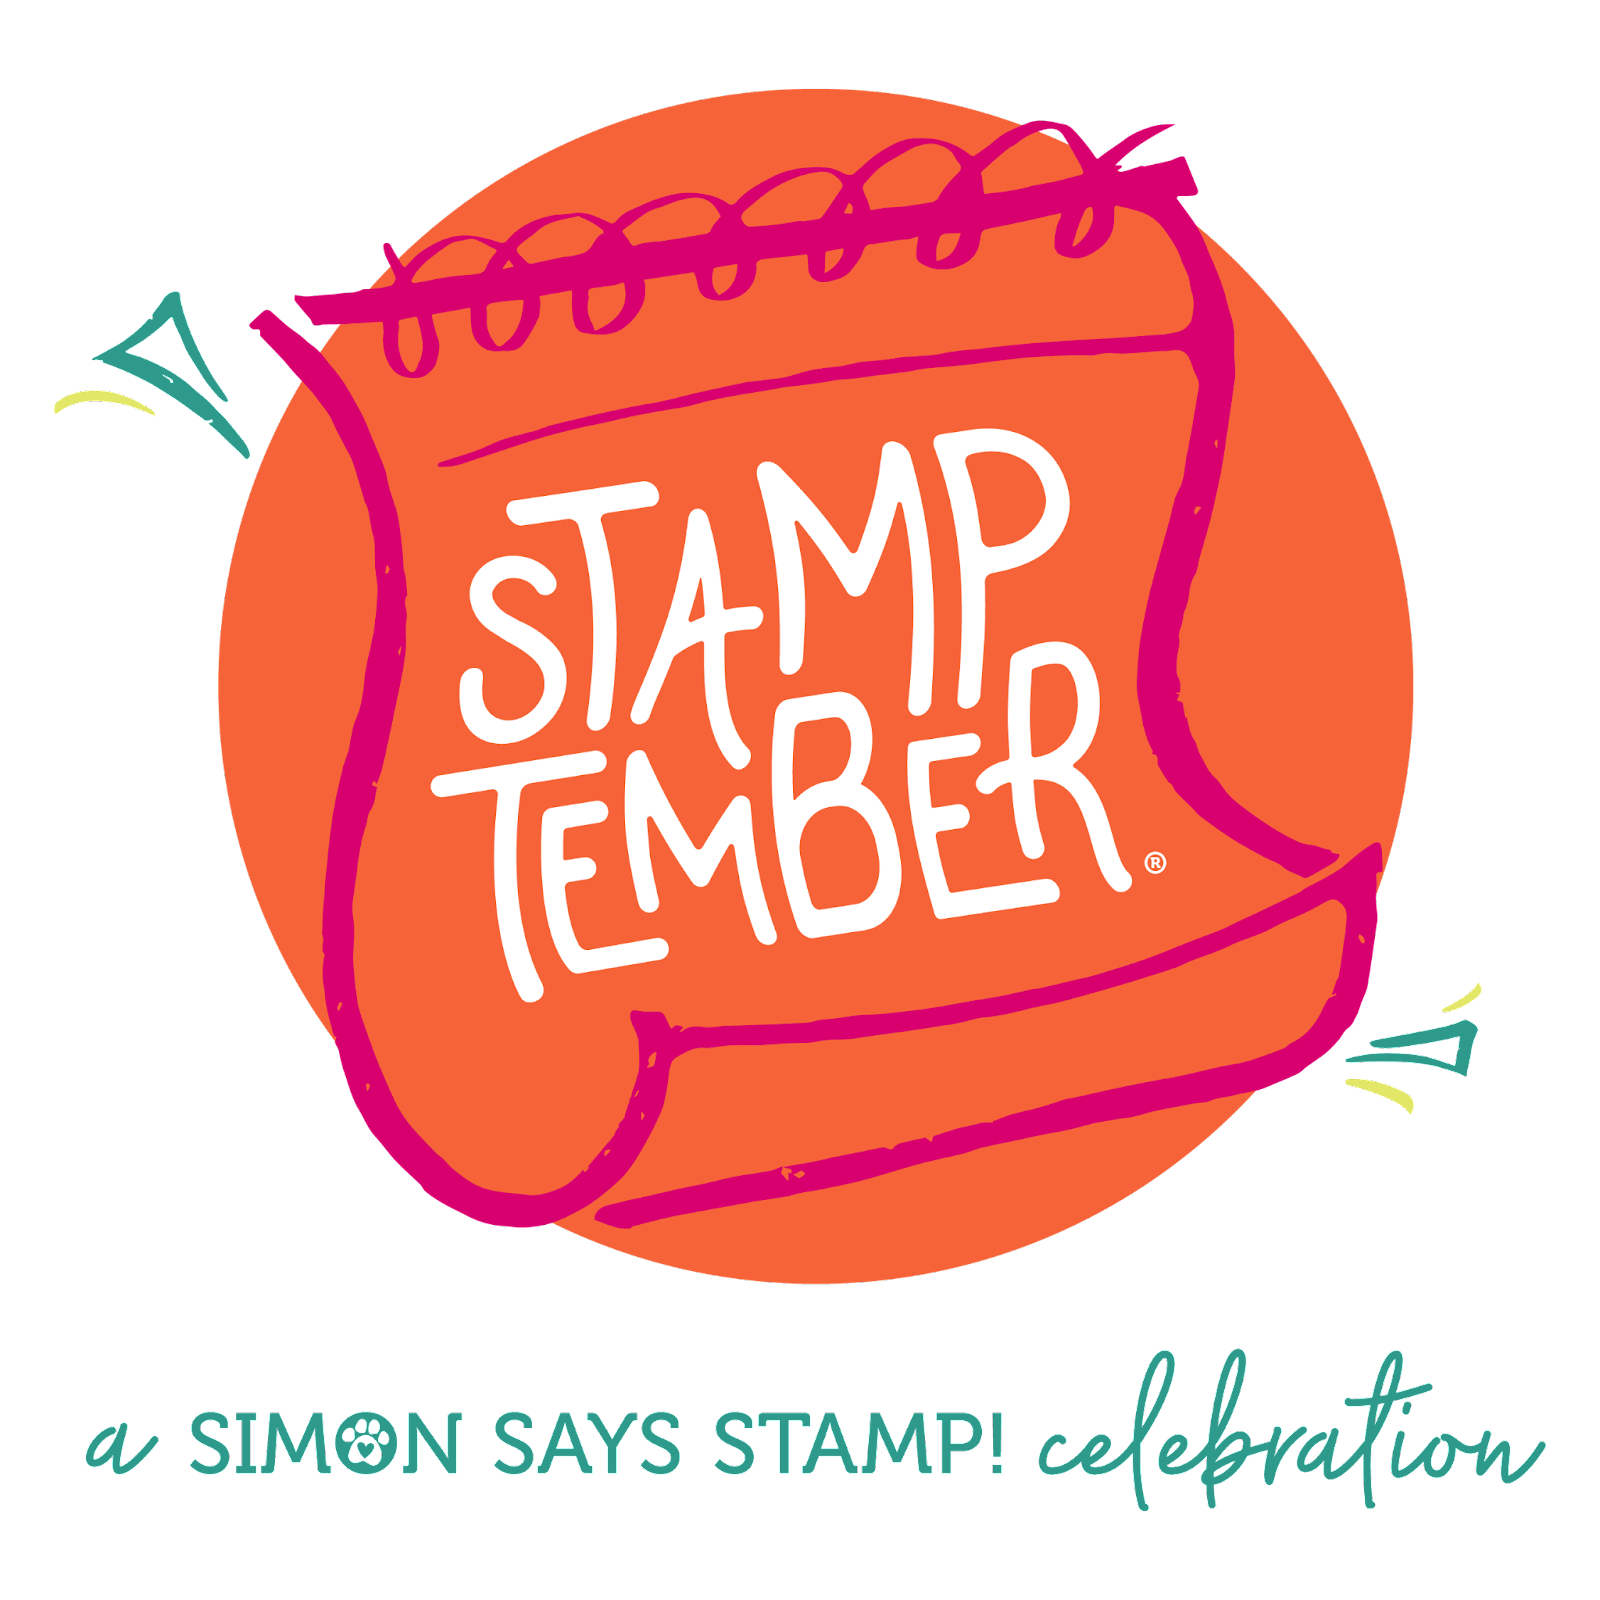 Are You Ready For The Best Time of Year? It’s Stamptember!